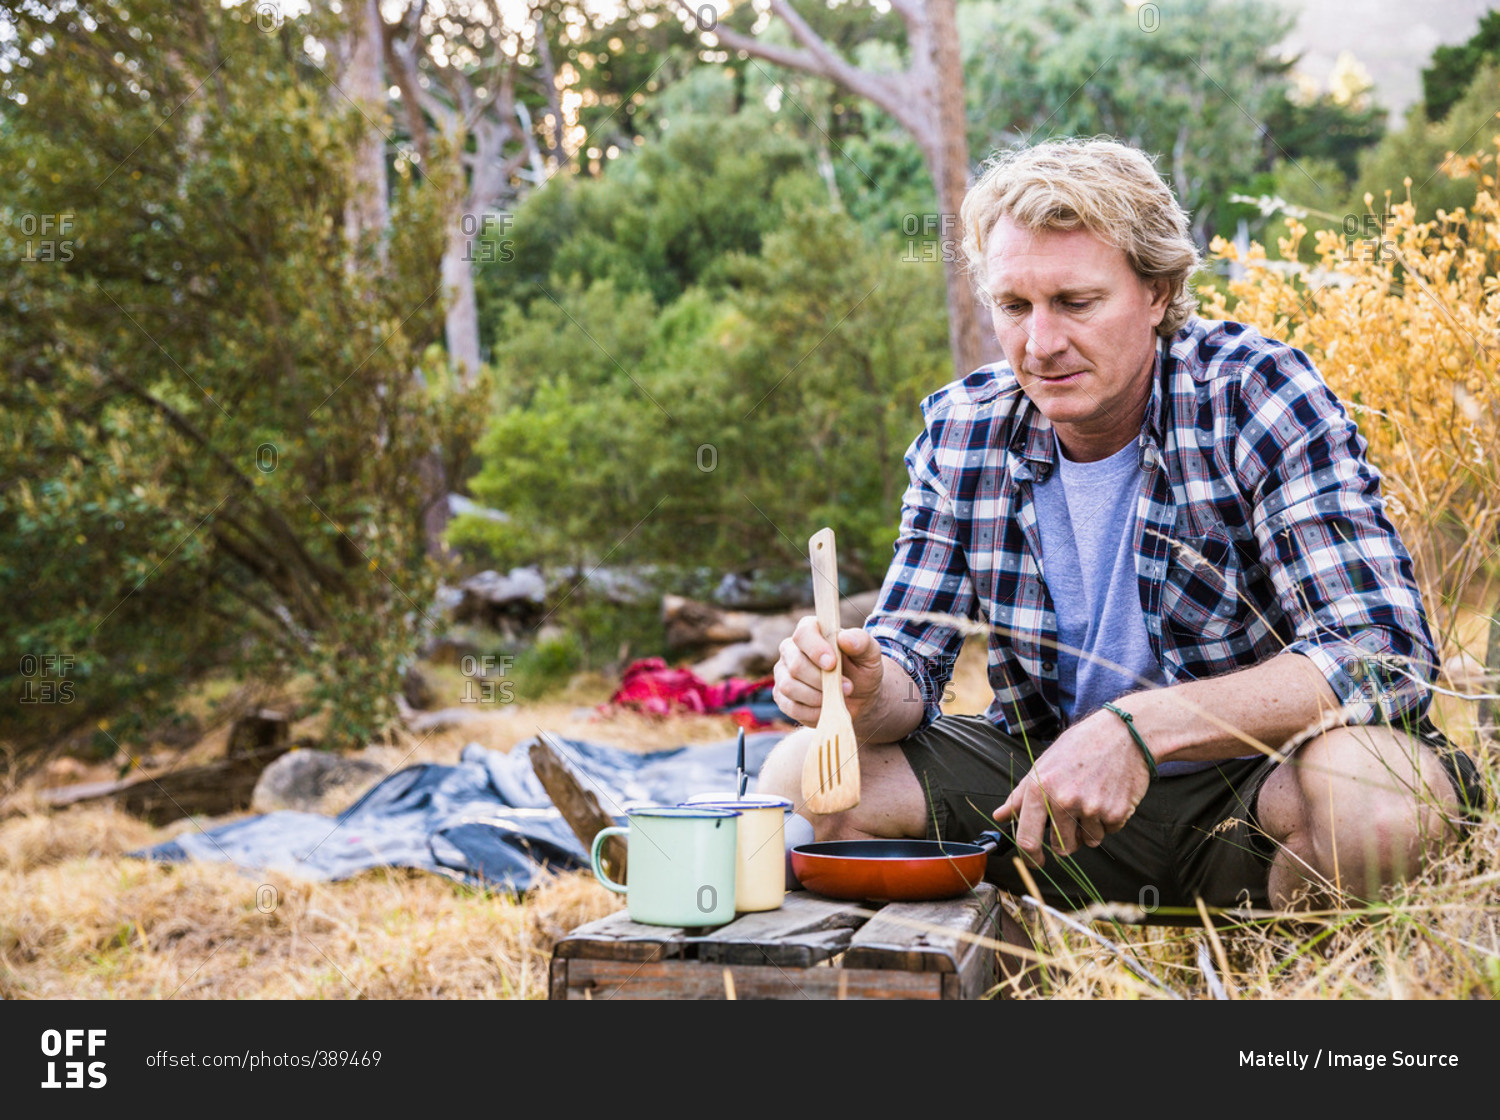 Mature man frying breakfast on camping stove in forest